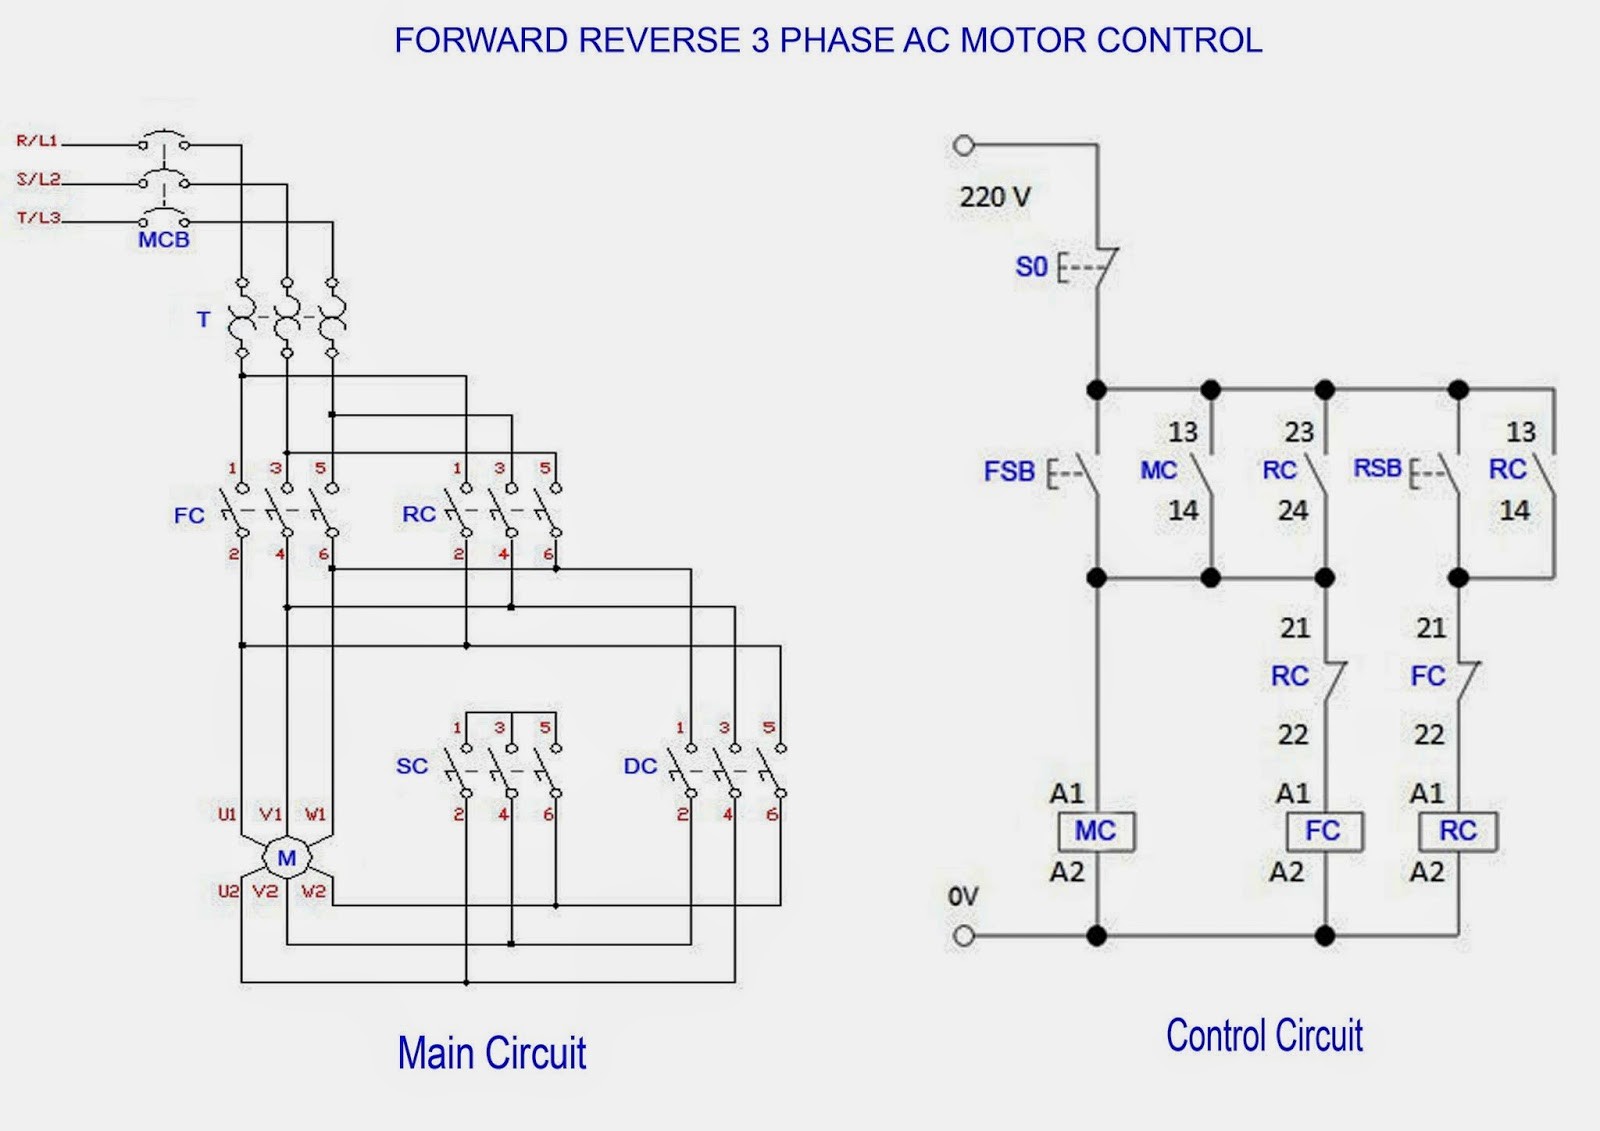 Forward Reverse 3 Phase Ac Motor Control Wiring Diagram Electrical Delta Wiring Diagram Explanation Further 3